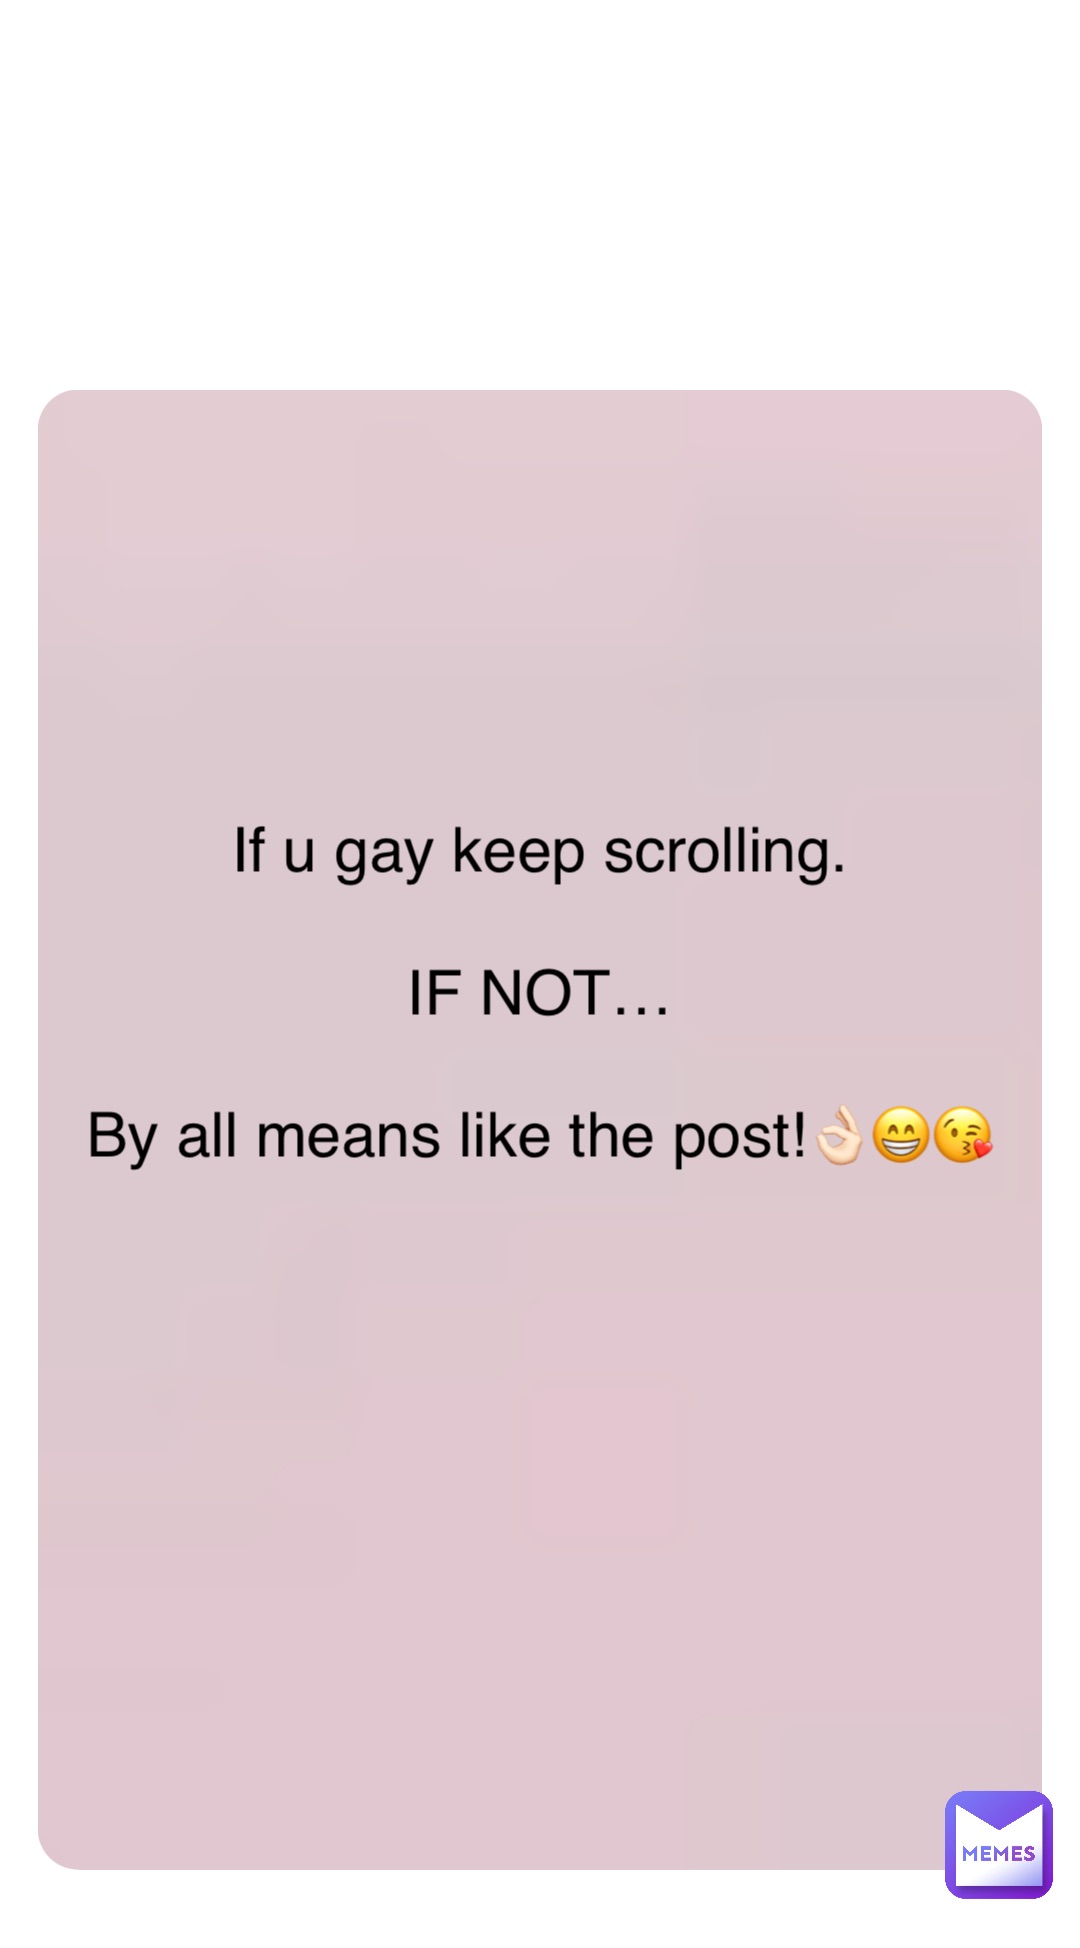 If u gay keep scrolling.

IF NOT…

By all means like the post!👌🏻😁😘